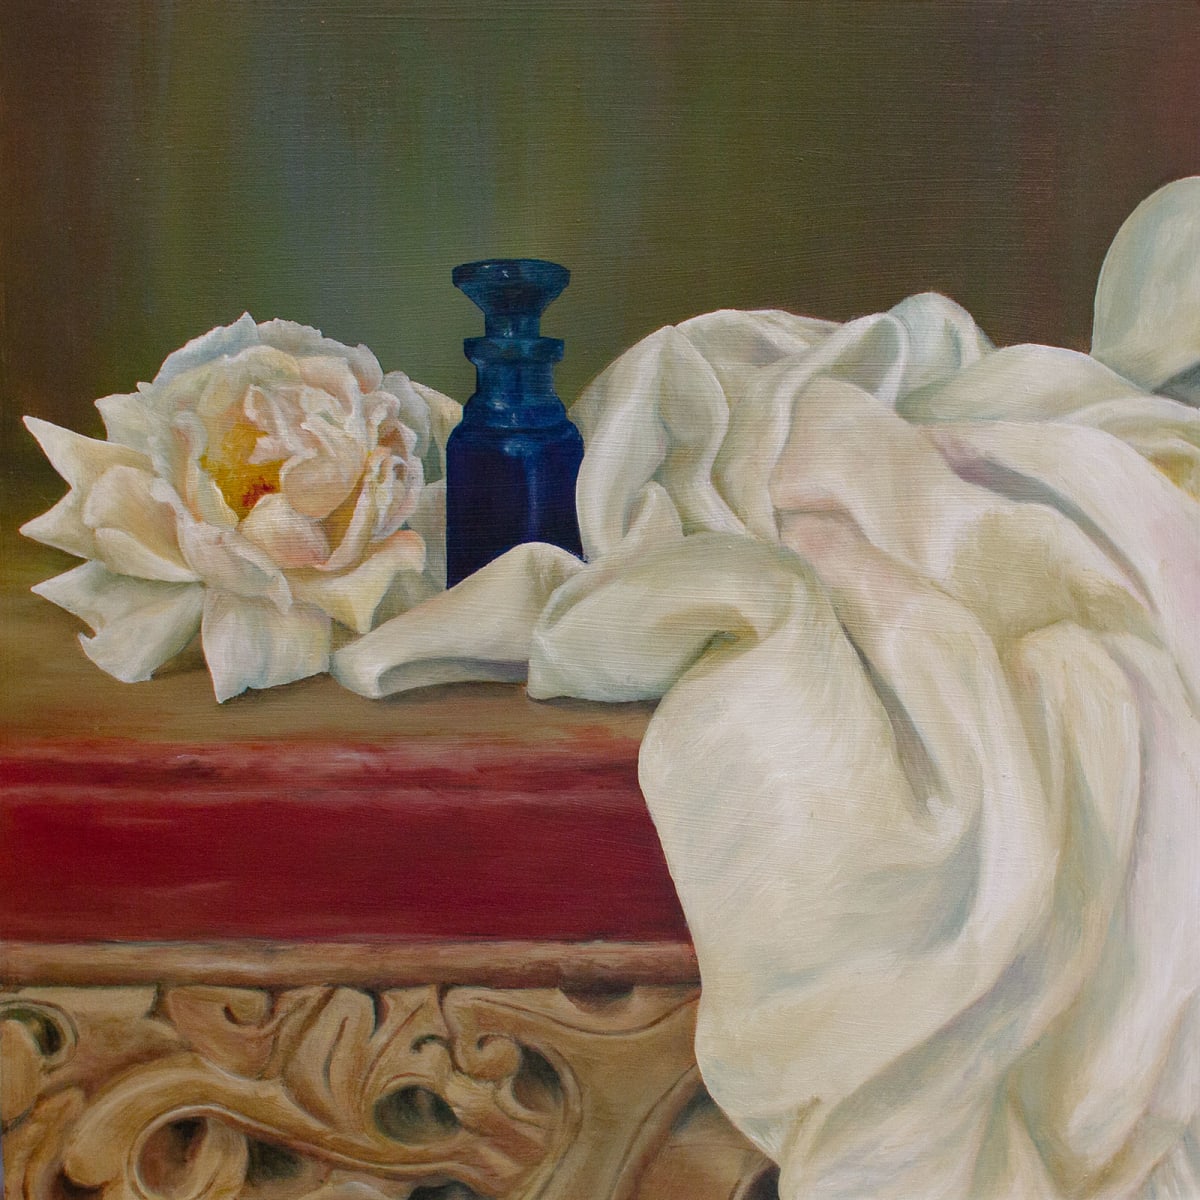 Precious Scents by Kirsten Hocking  Image: "Precious Scents", original painting by Kirsten Hocking, oil on board, 30.5cm x 30.5cm, 2023